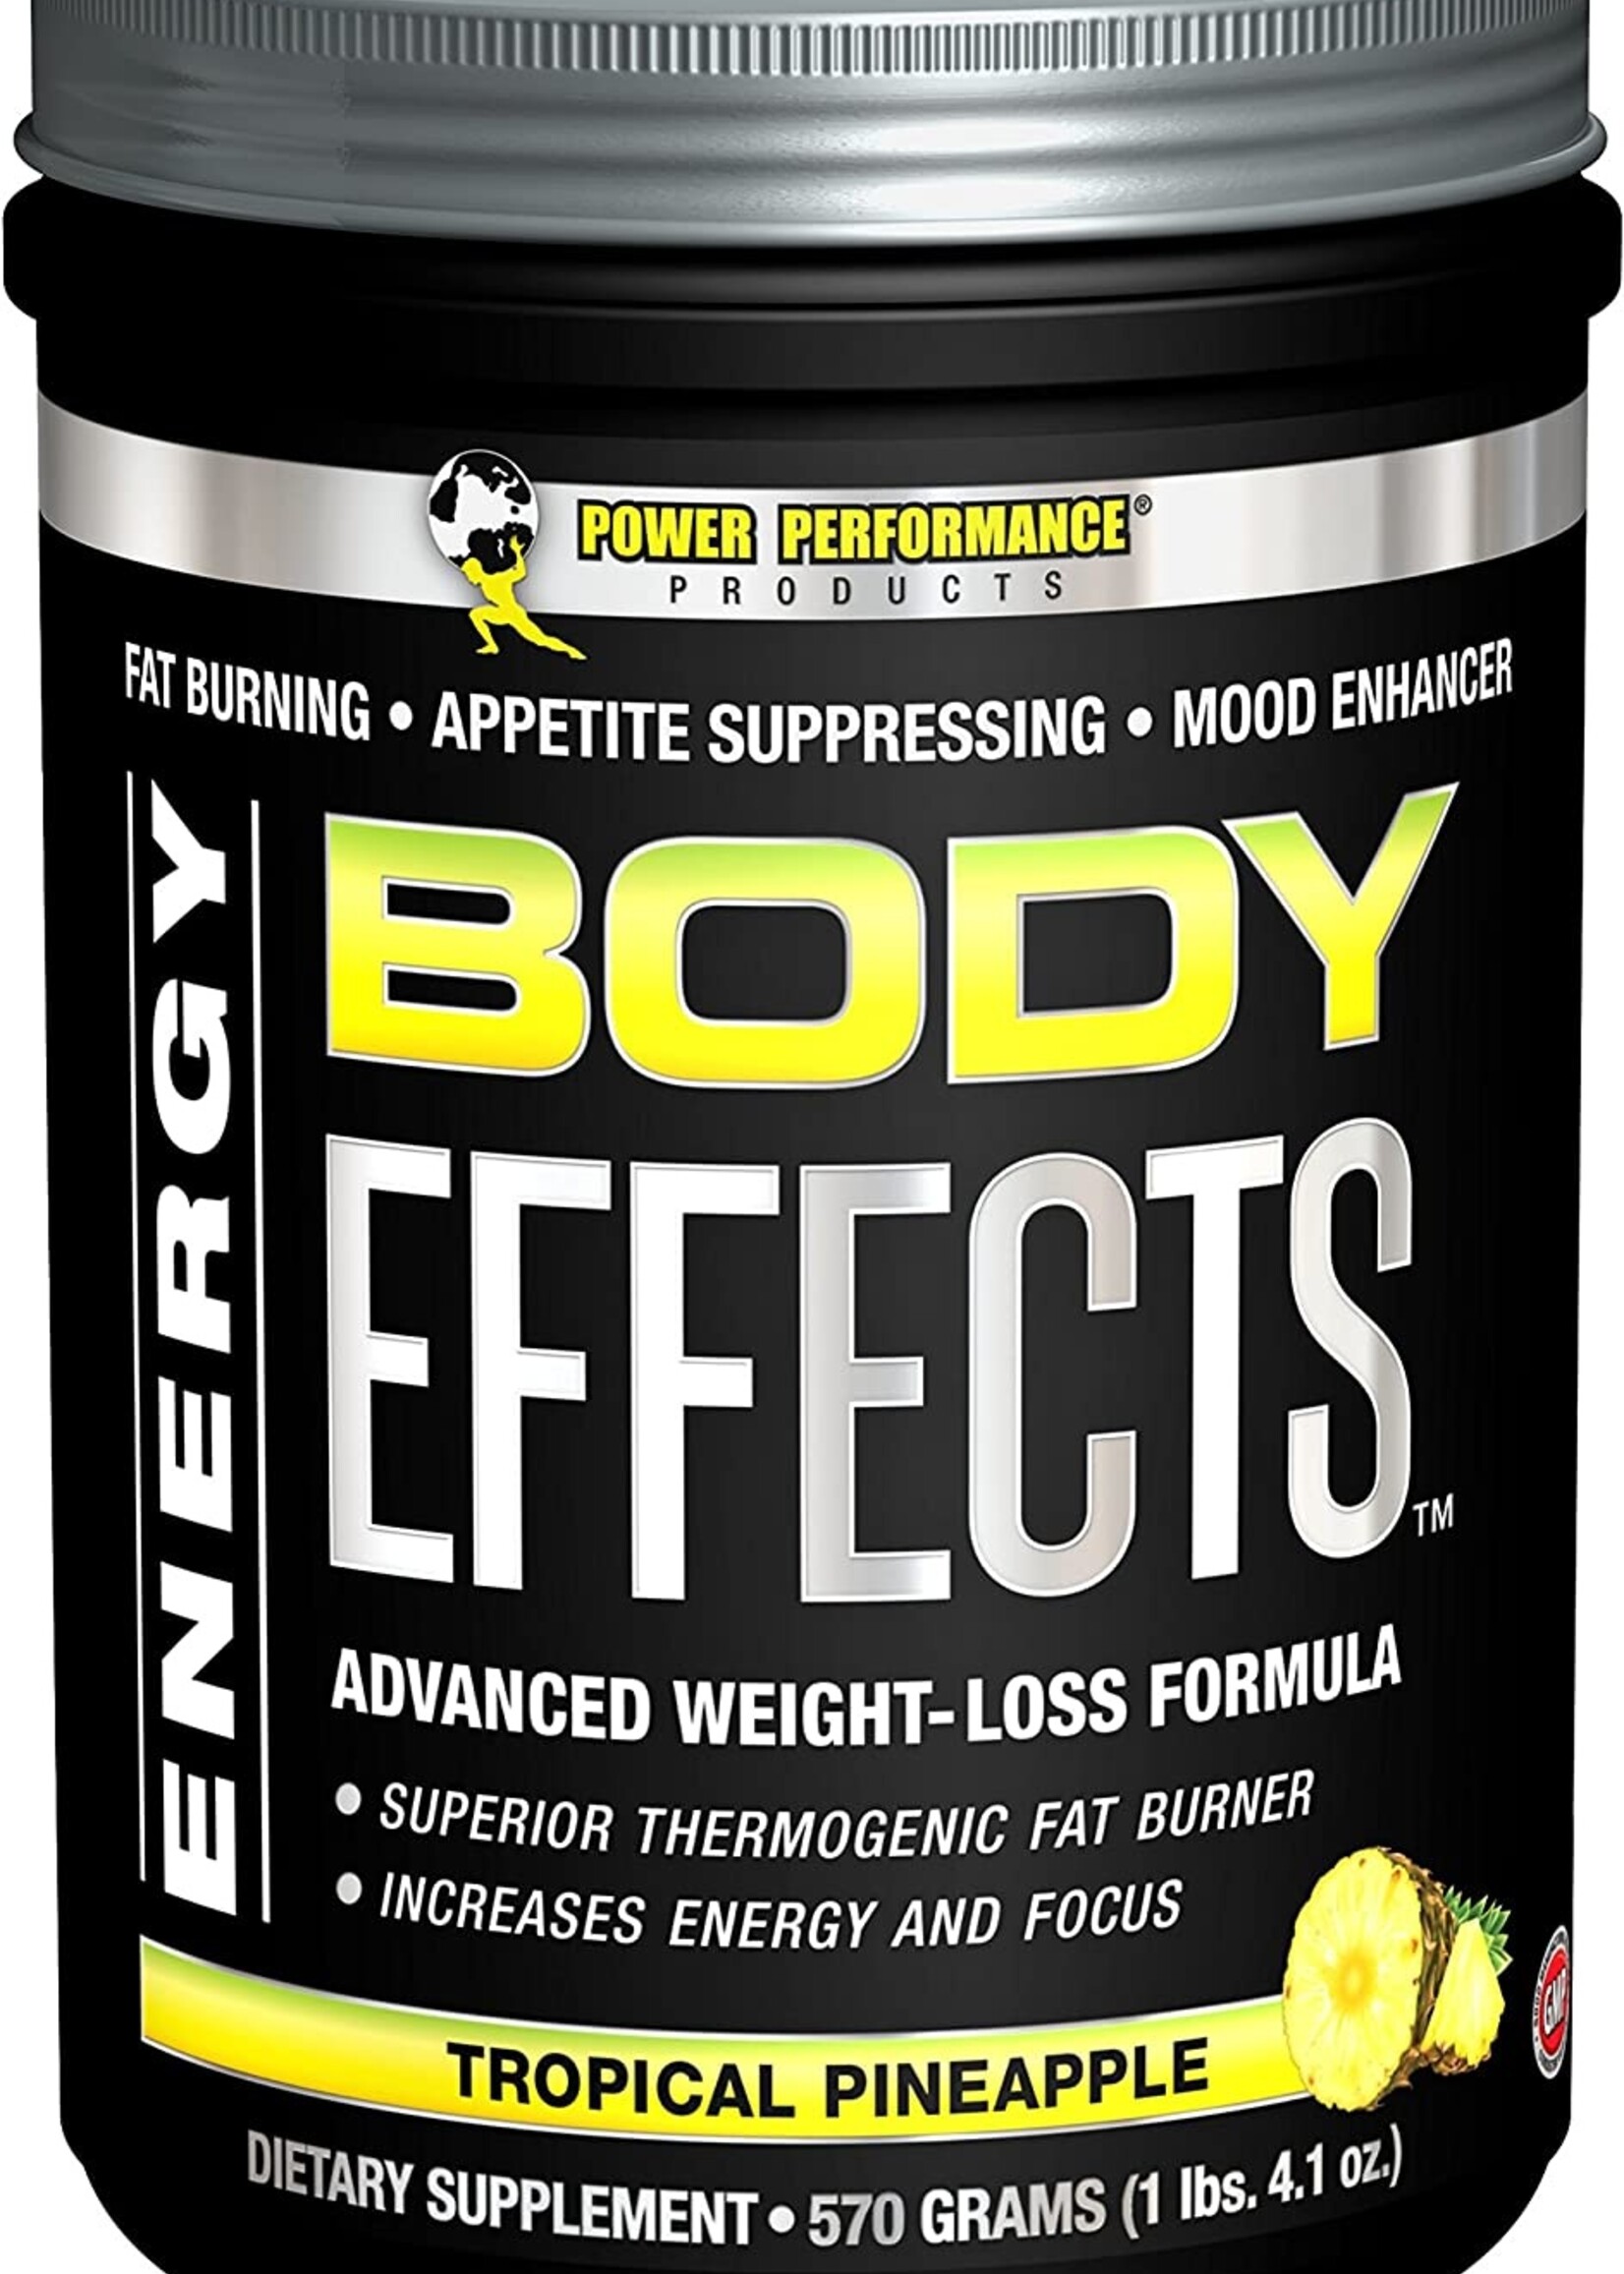 Power Performance Power Performance Body Effects Tropical Pineapple